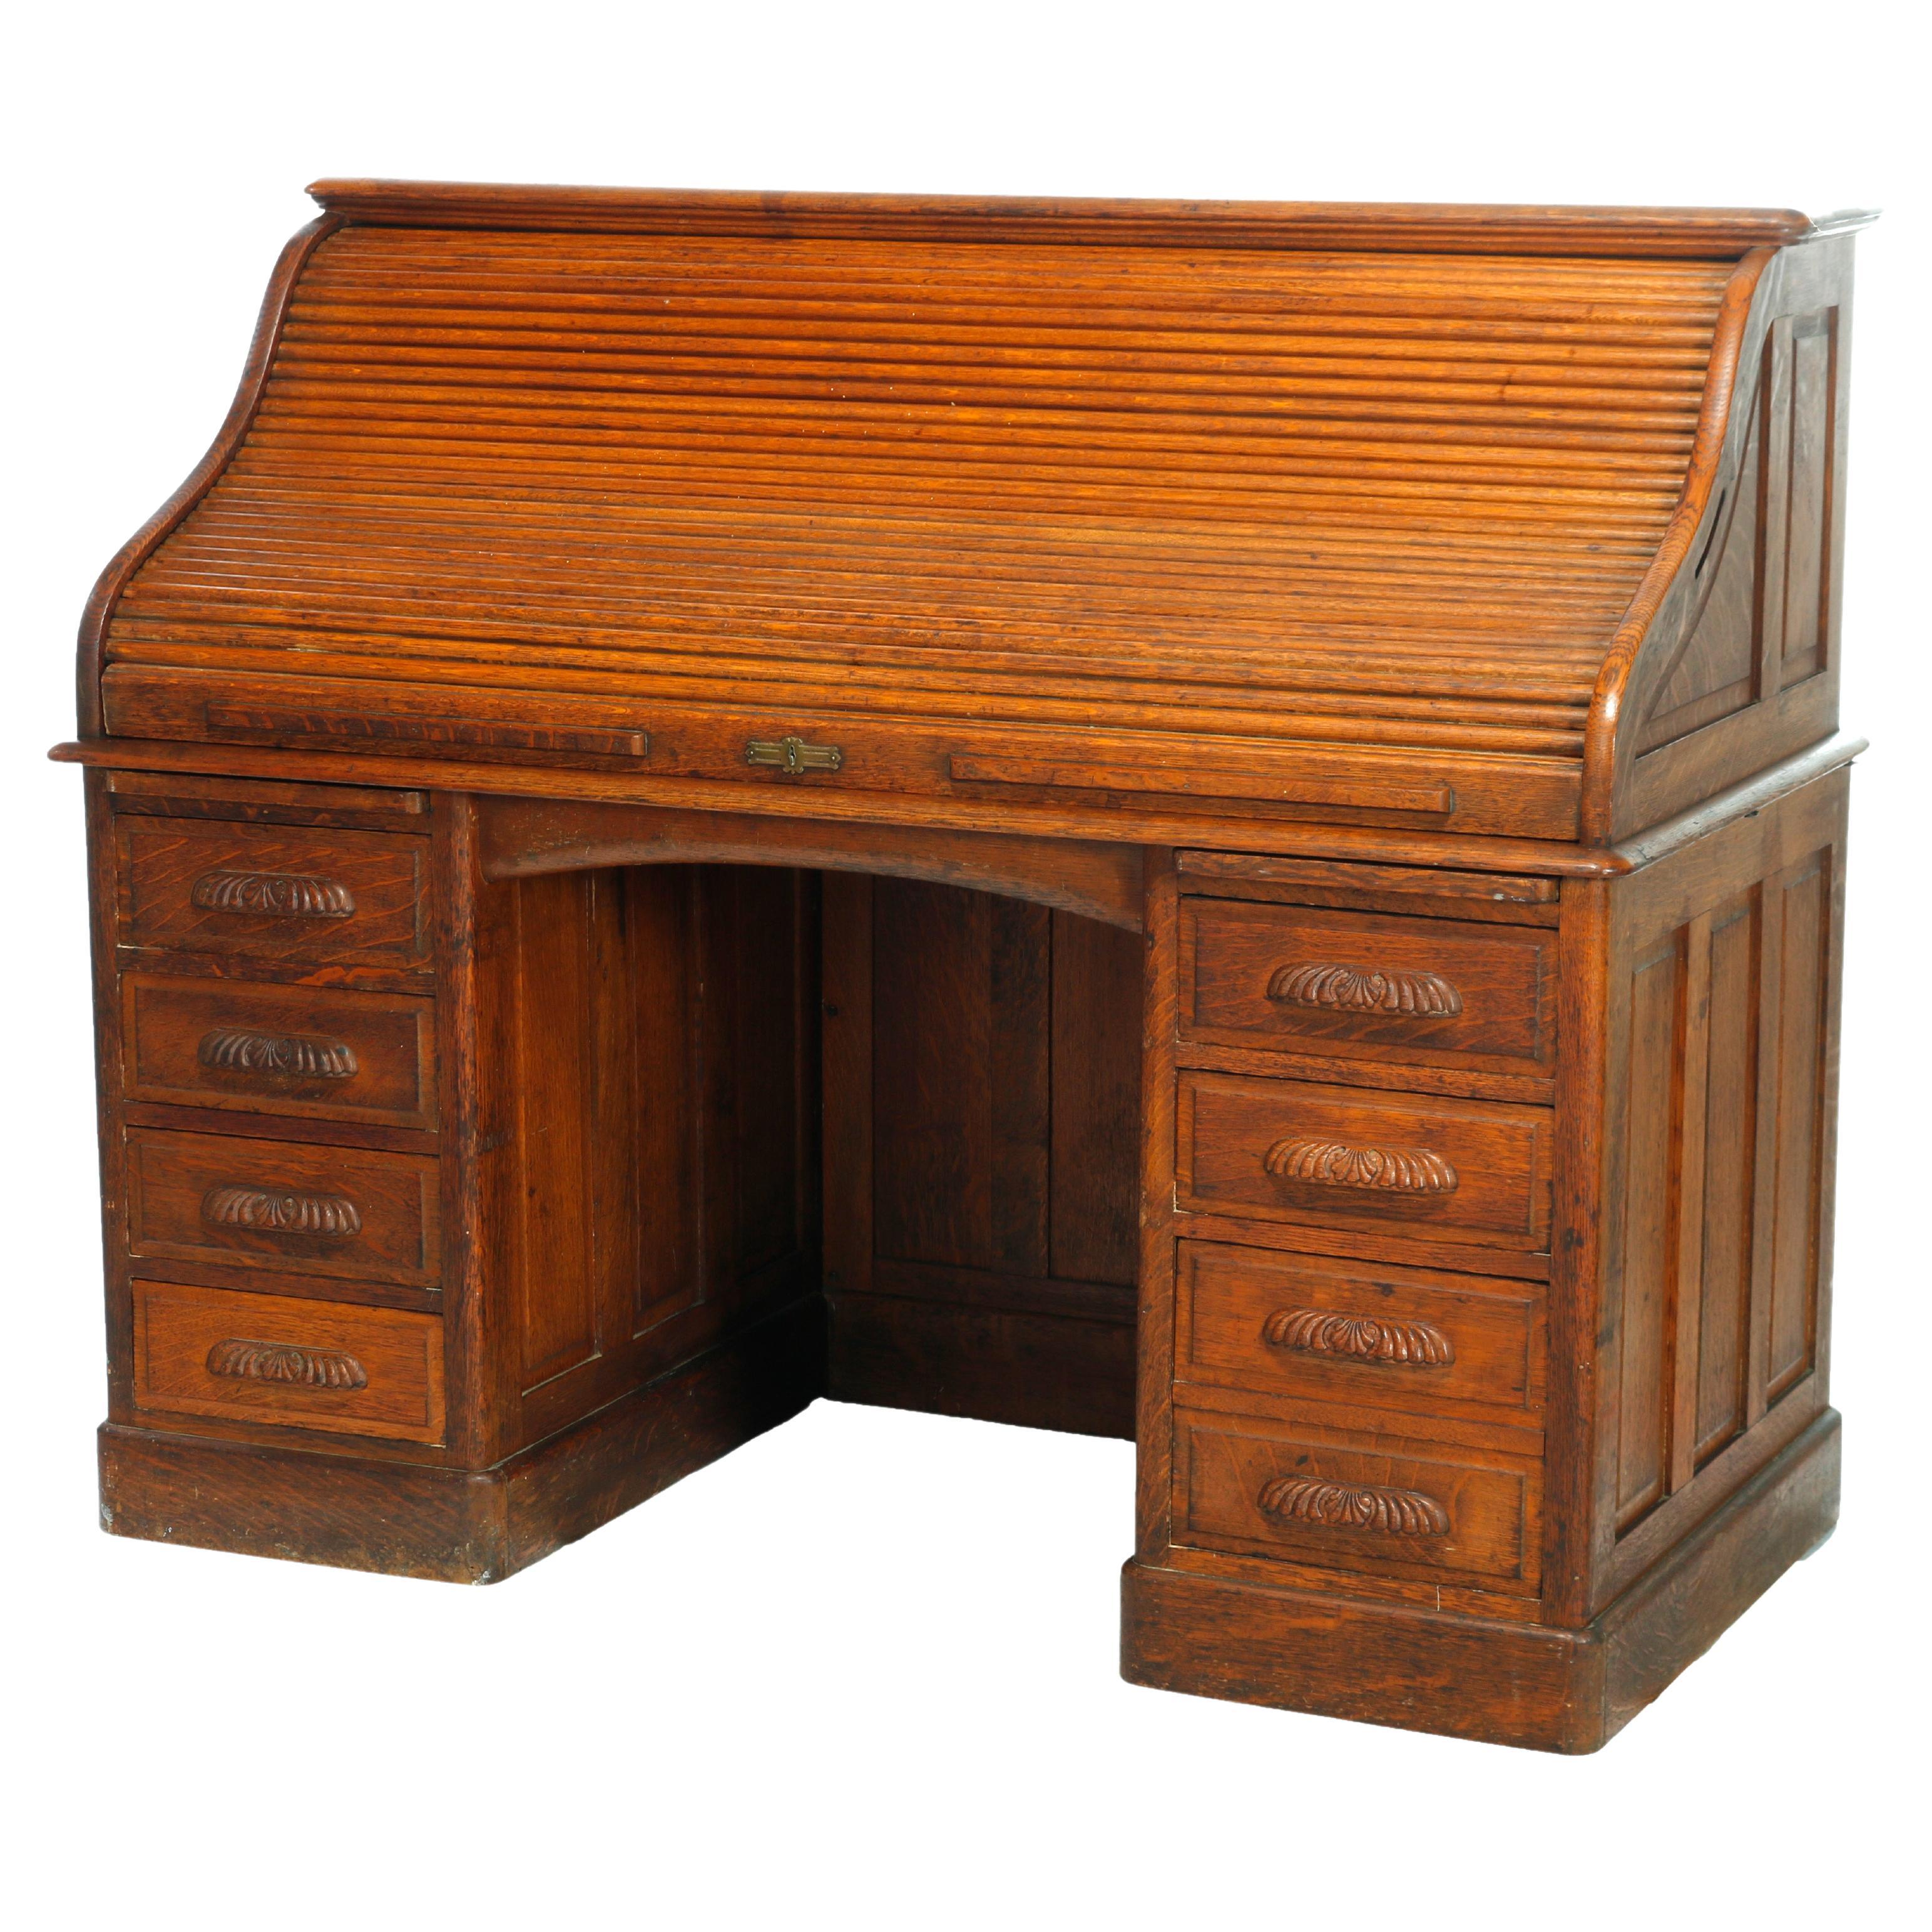 Antique Derby School Paneled Oak Roll Top Desk with Full Interior, C1900 For Sale